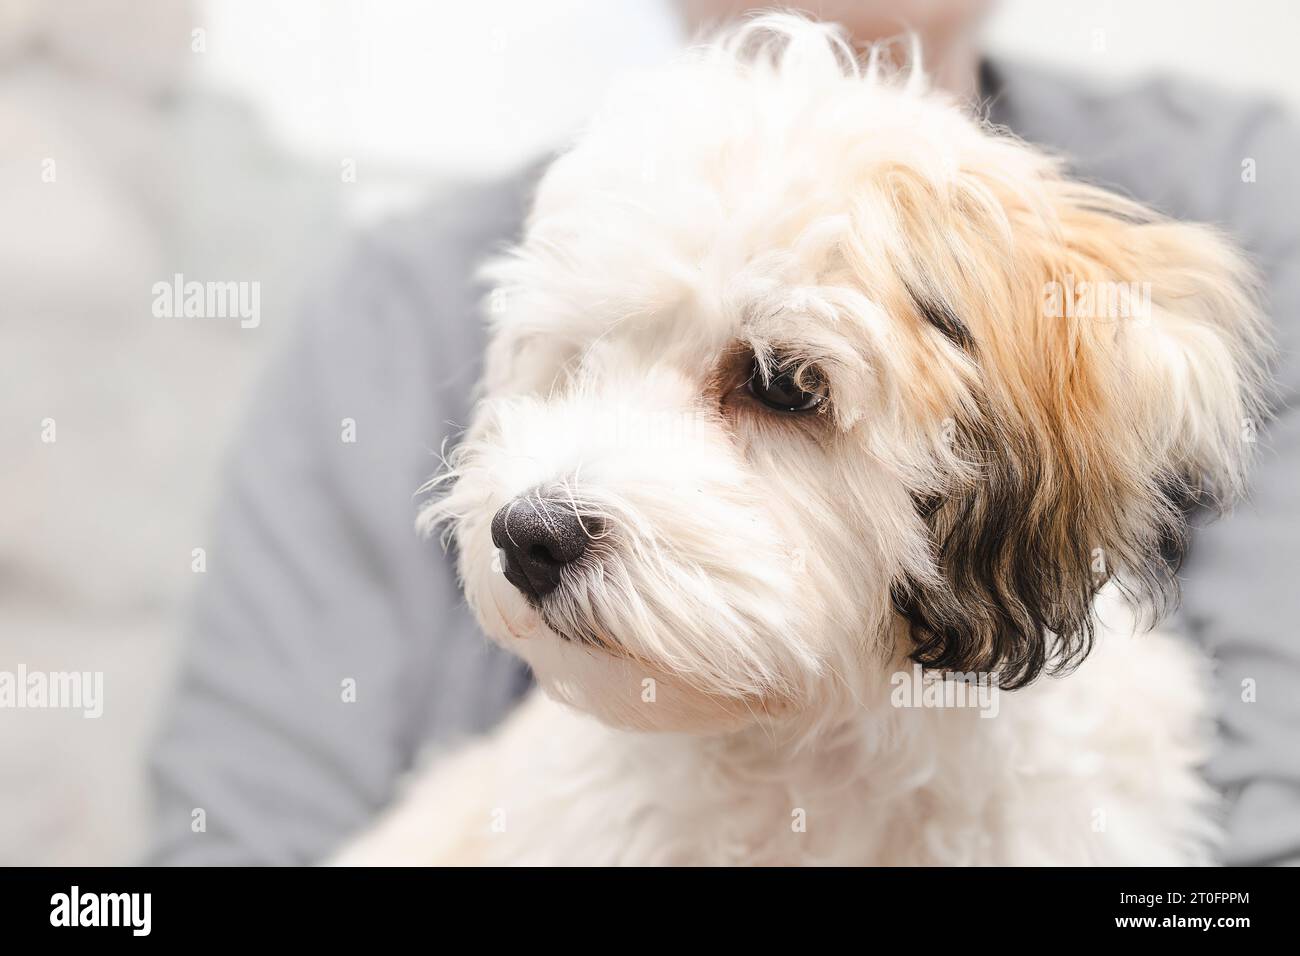 Cute Havanese puppy sitting on pet owners or persons lap. Side profile of fluffy puppy dog feeling safe. 16 weeks old female Havanese dog. White face, Stock Photo